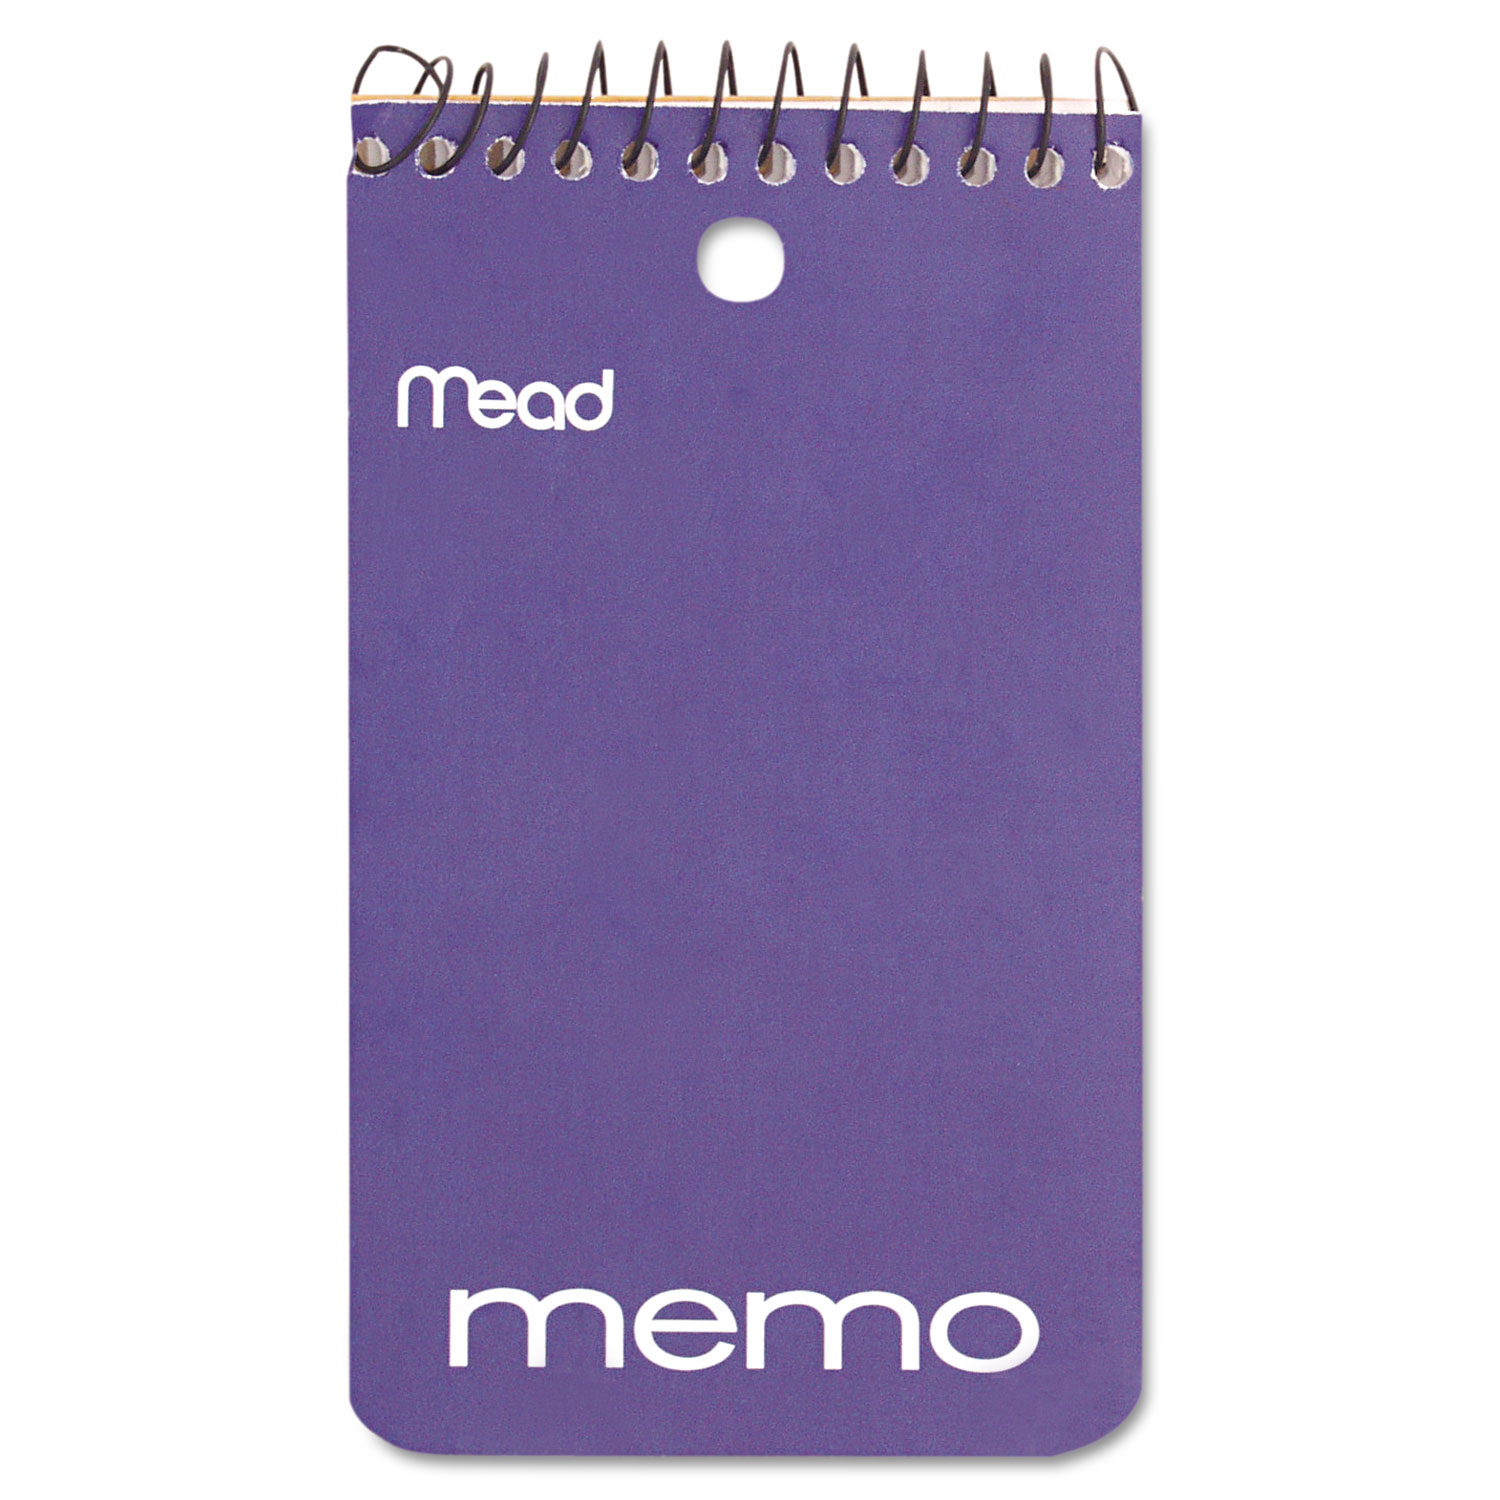 Memo Book, College Ruled, 3 x 5, Wirebound, Punched, 60 Sheets, Assorted